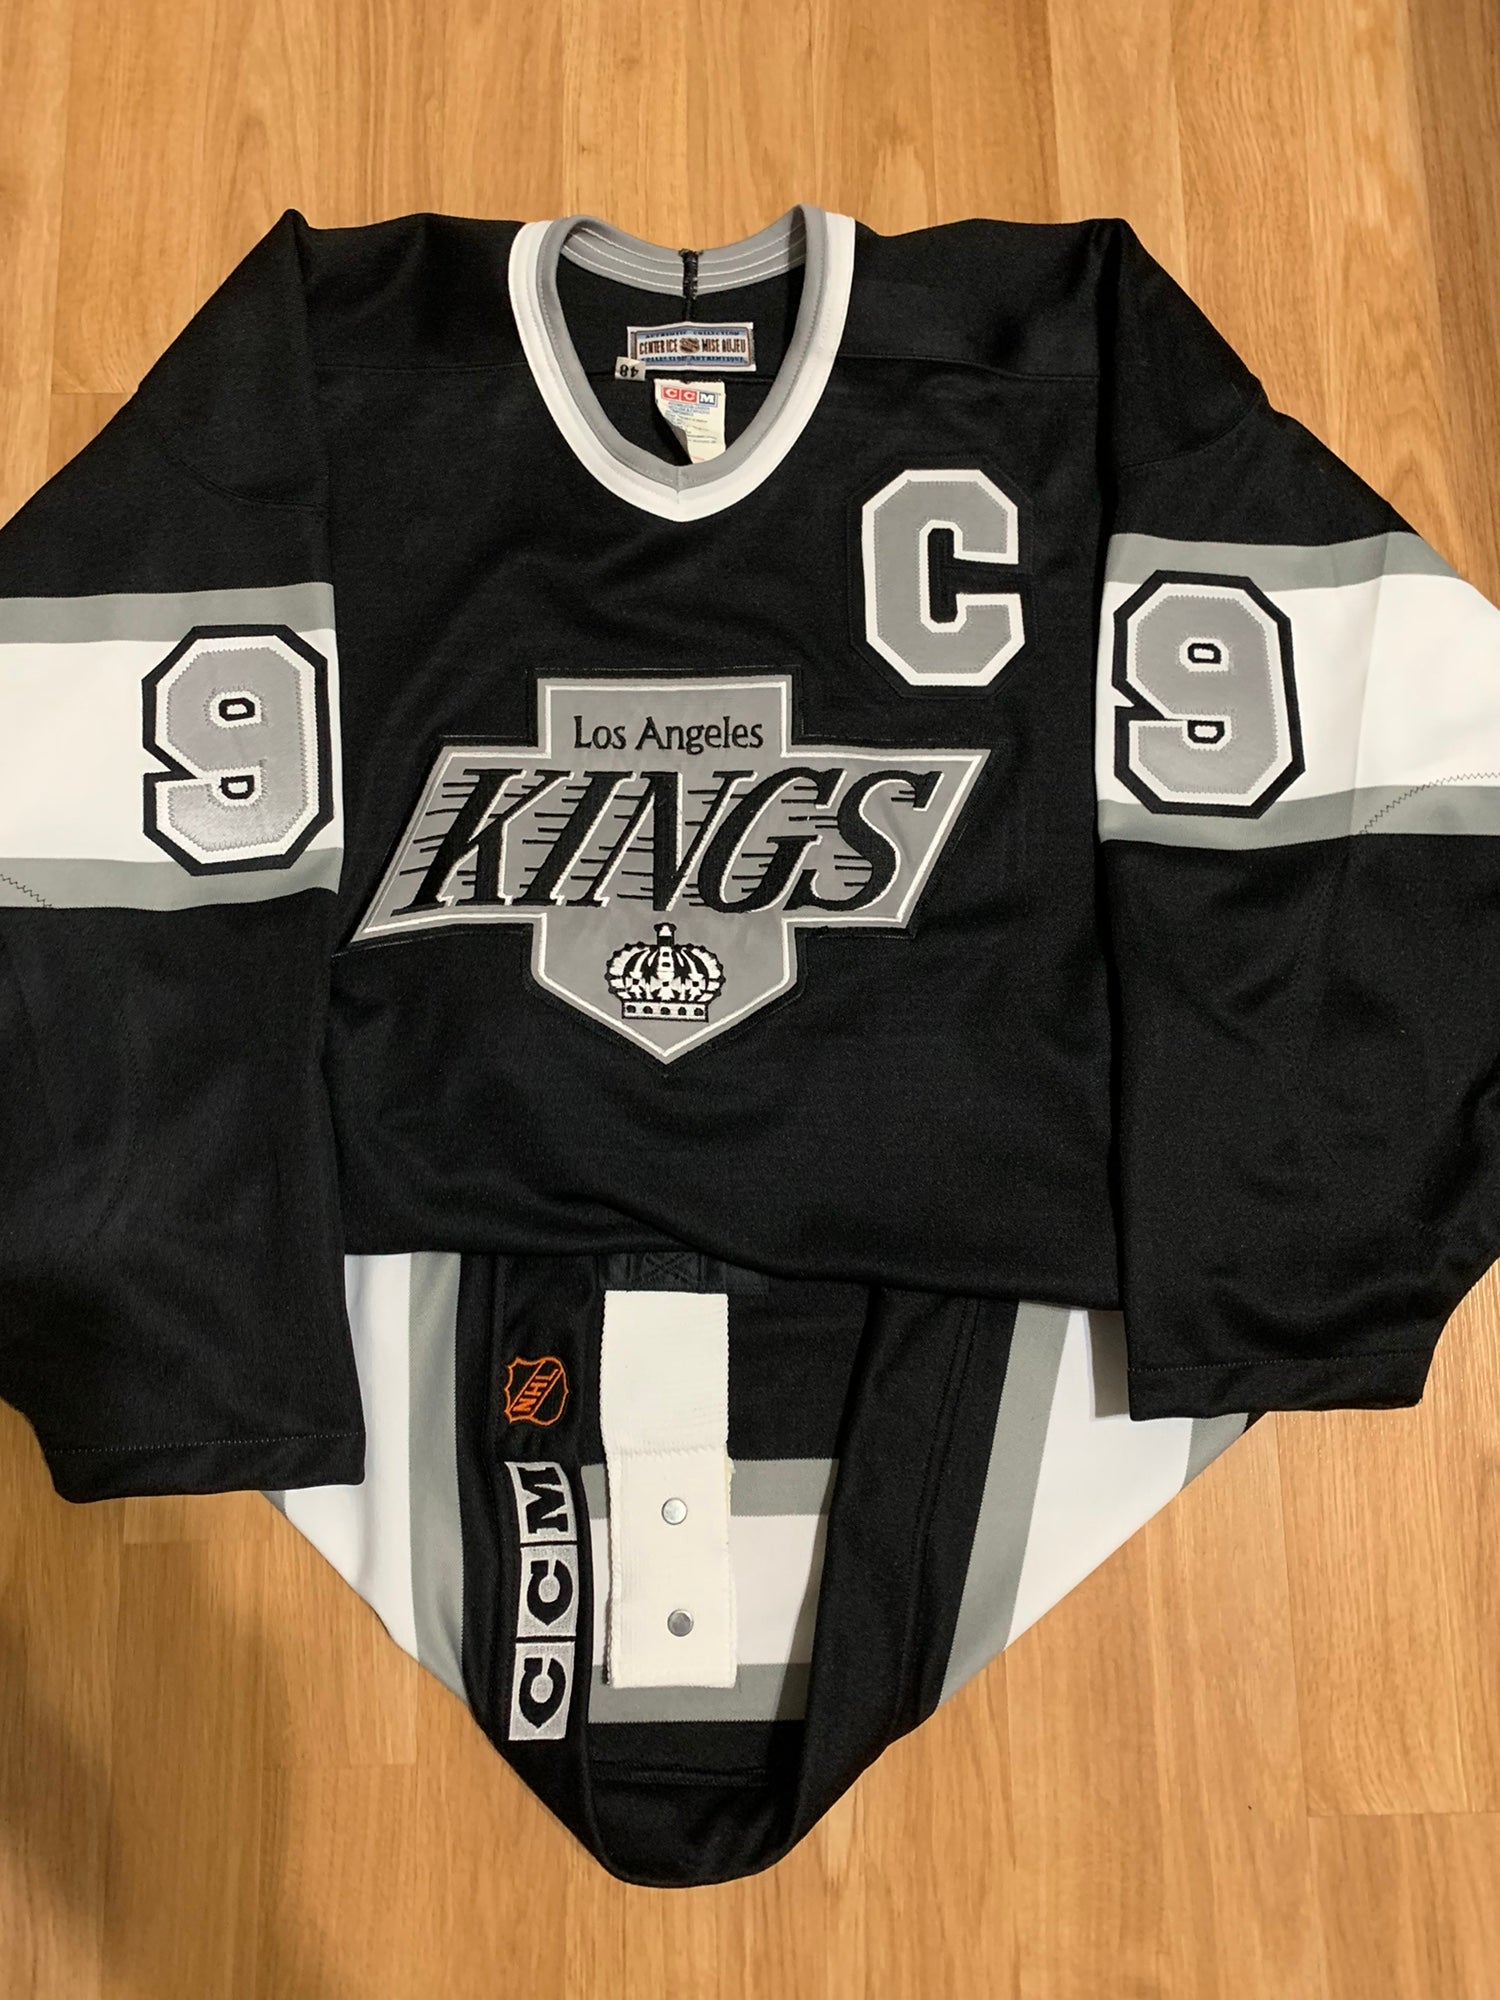 Adidas NHL Los Angeles Kings Authentic Jersey - Adult